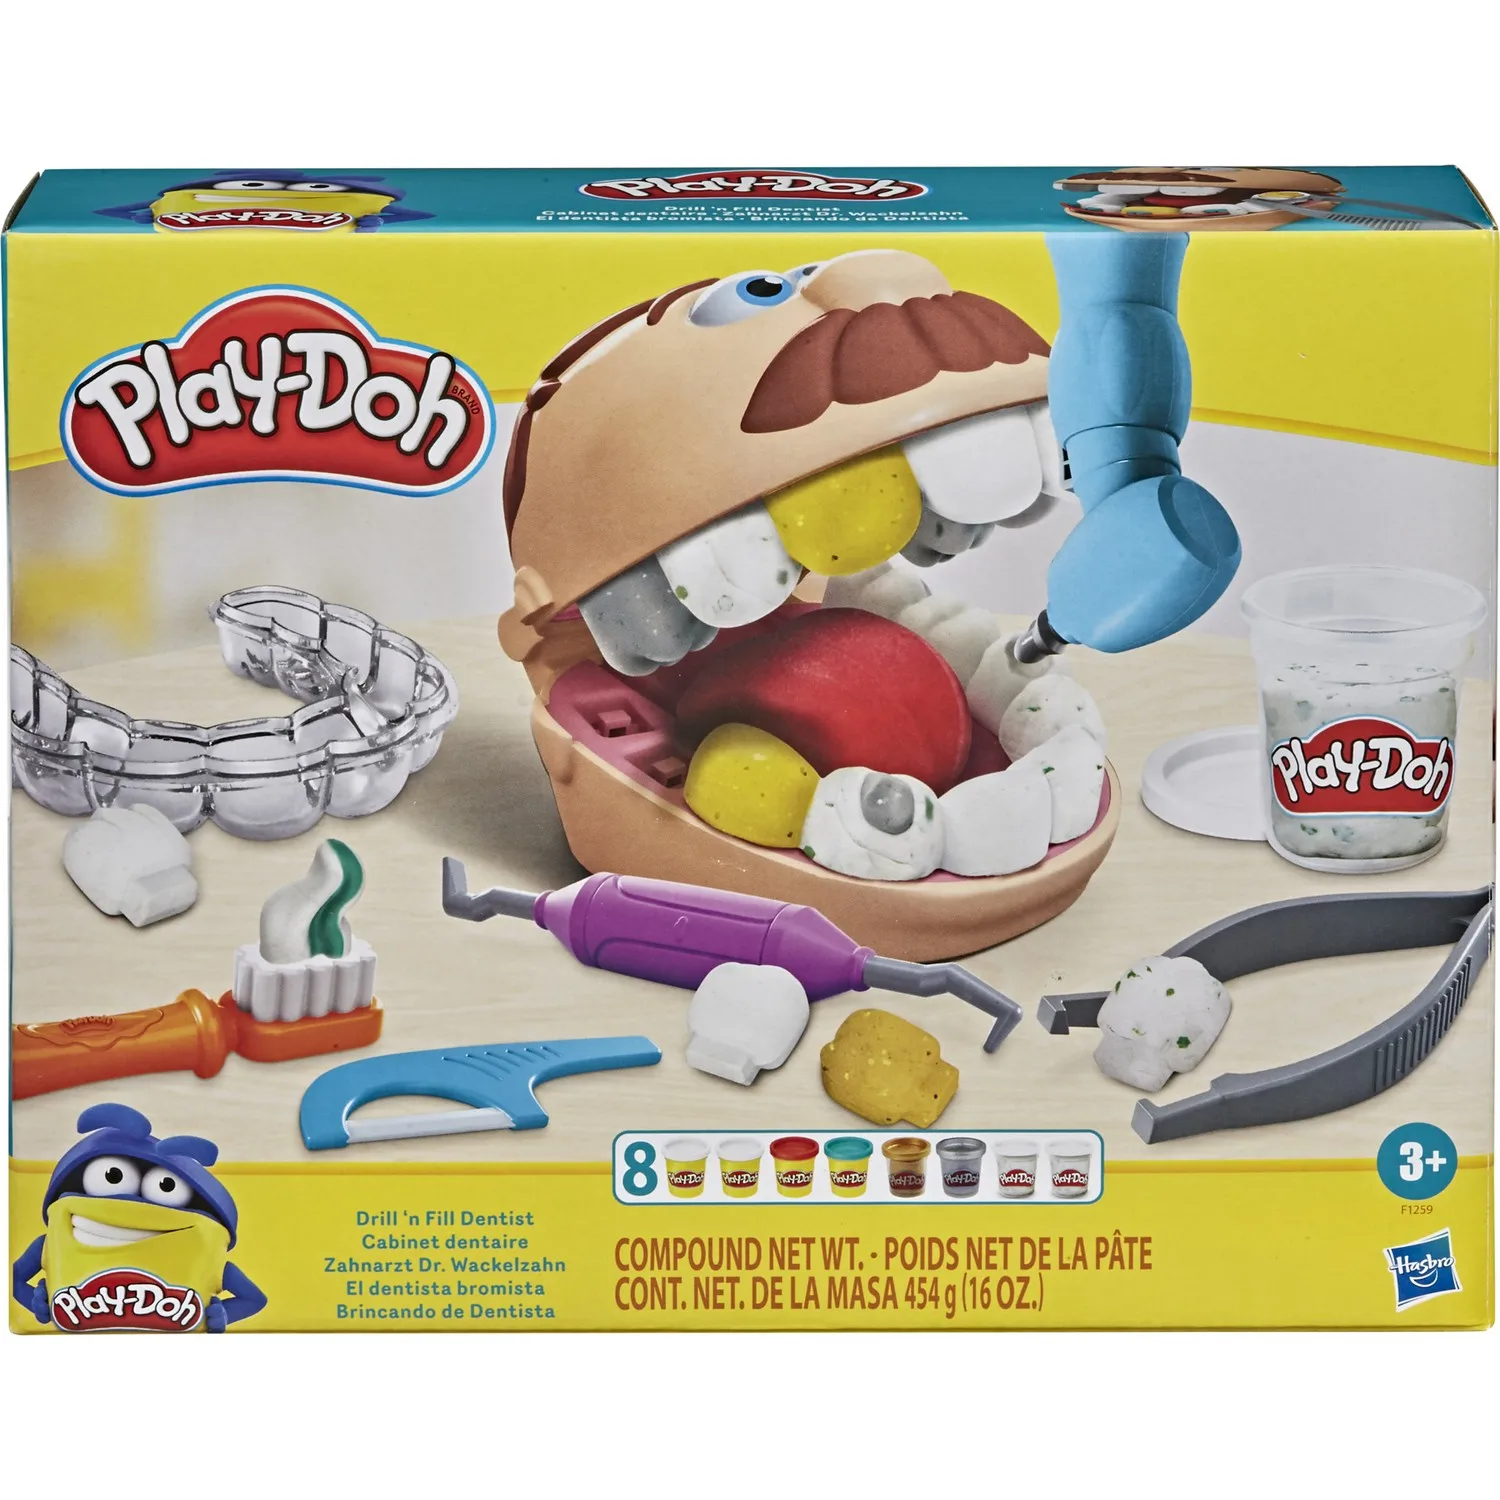 Play-Doh 18 Pcs Simulation Dentist Kit Tooth Extraction Clay Model Toys Dental Tool Set Kids Educational Toys for Children Gifts